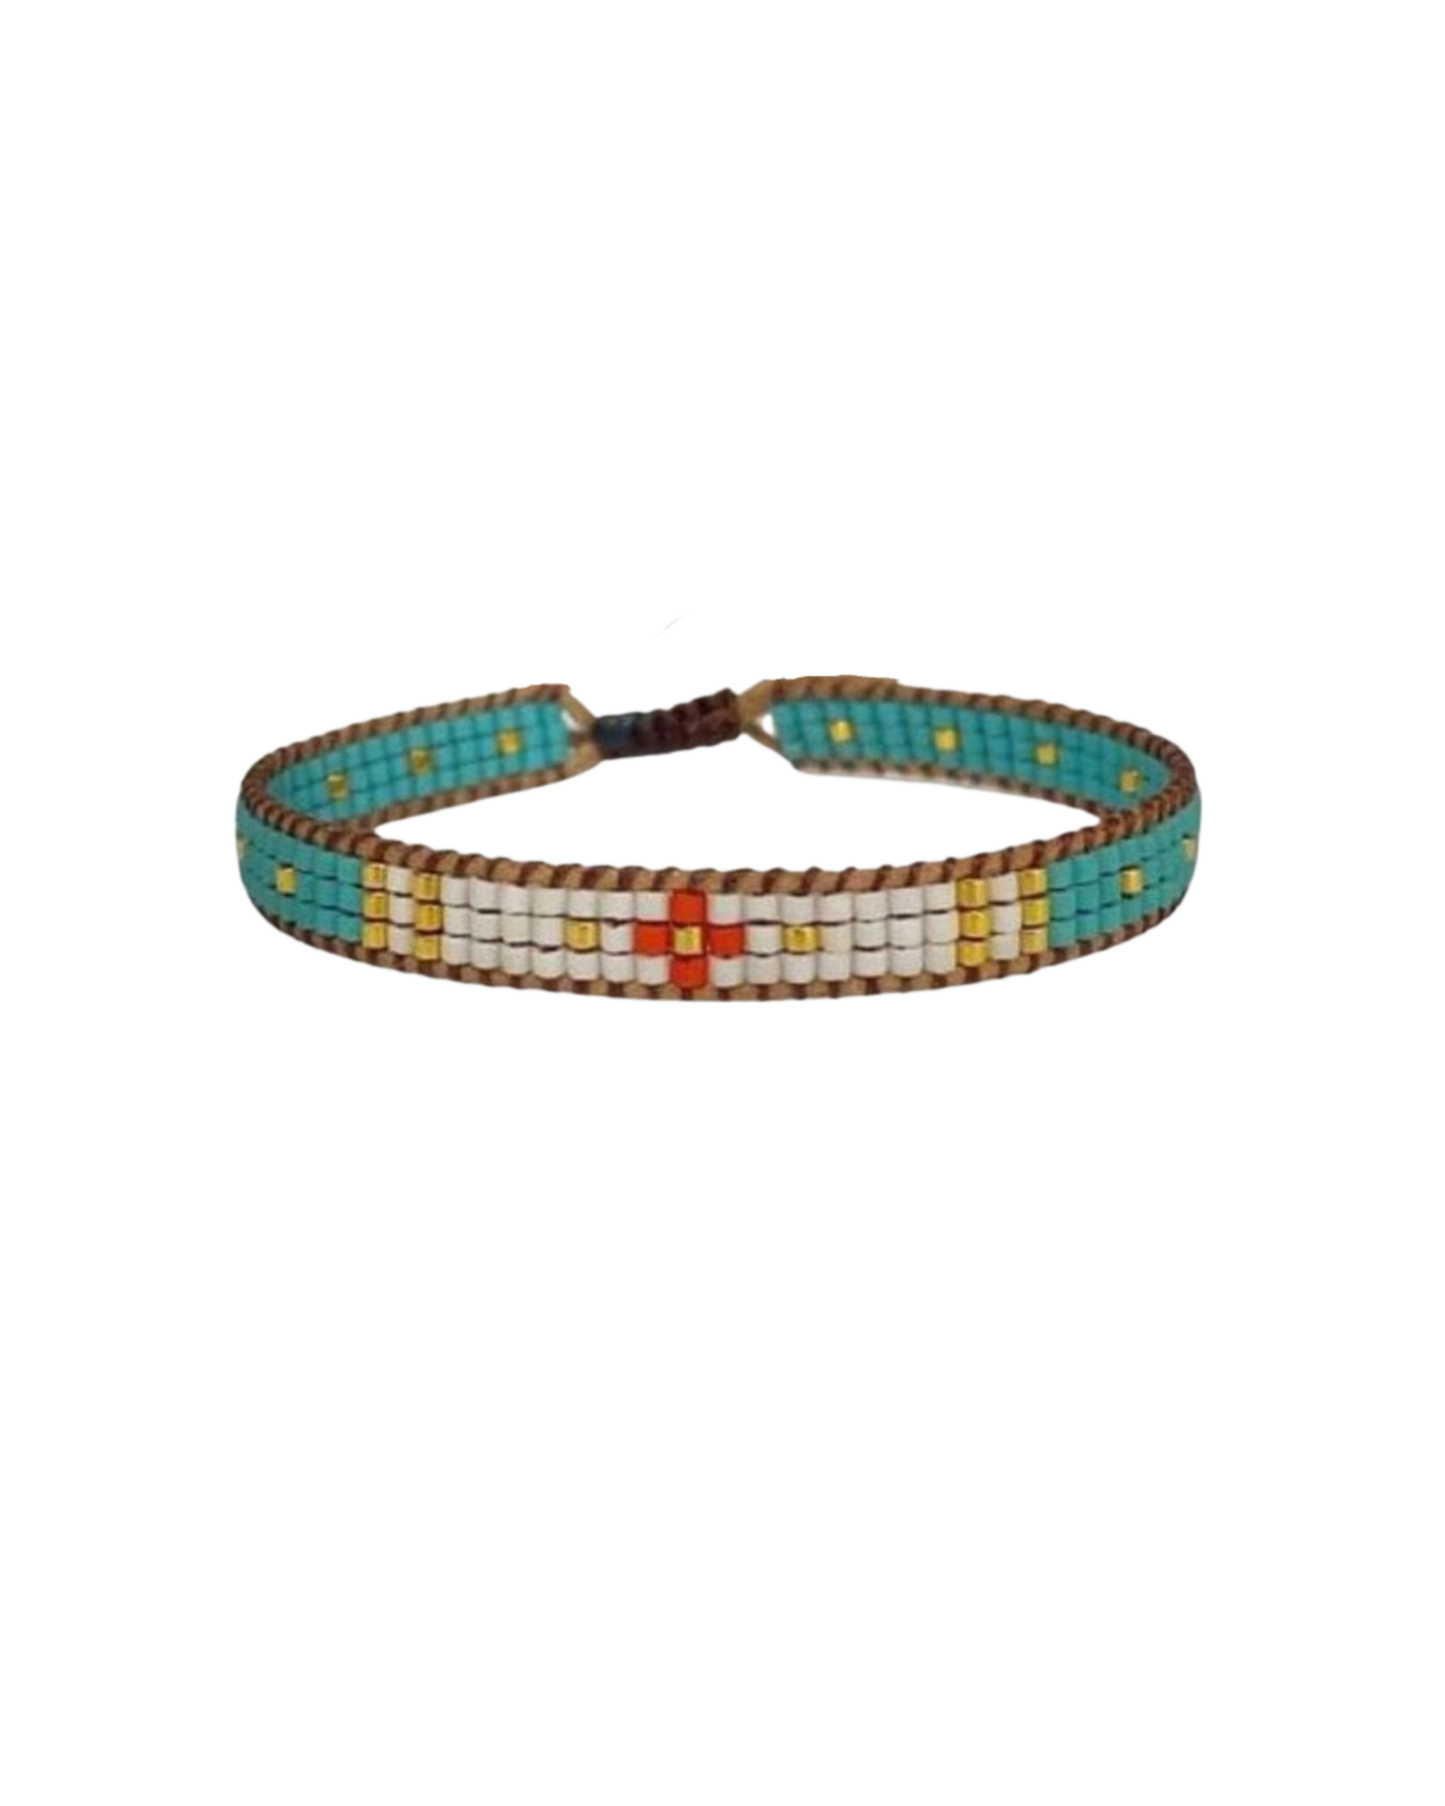 Turquoise and ivory mexican bracelets